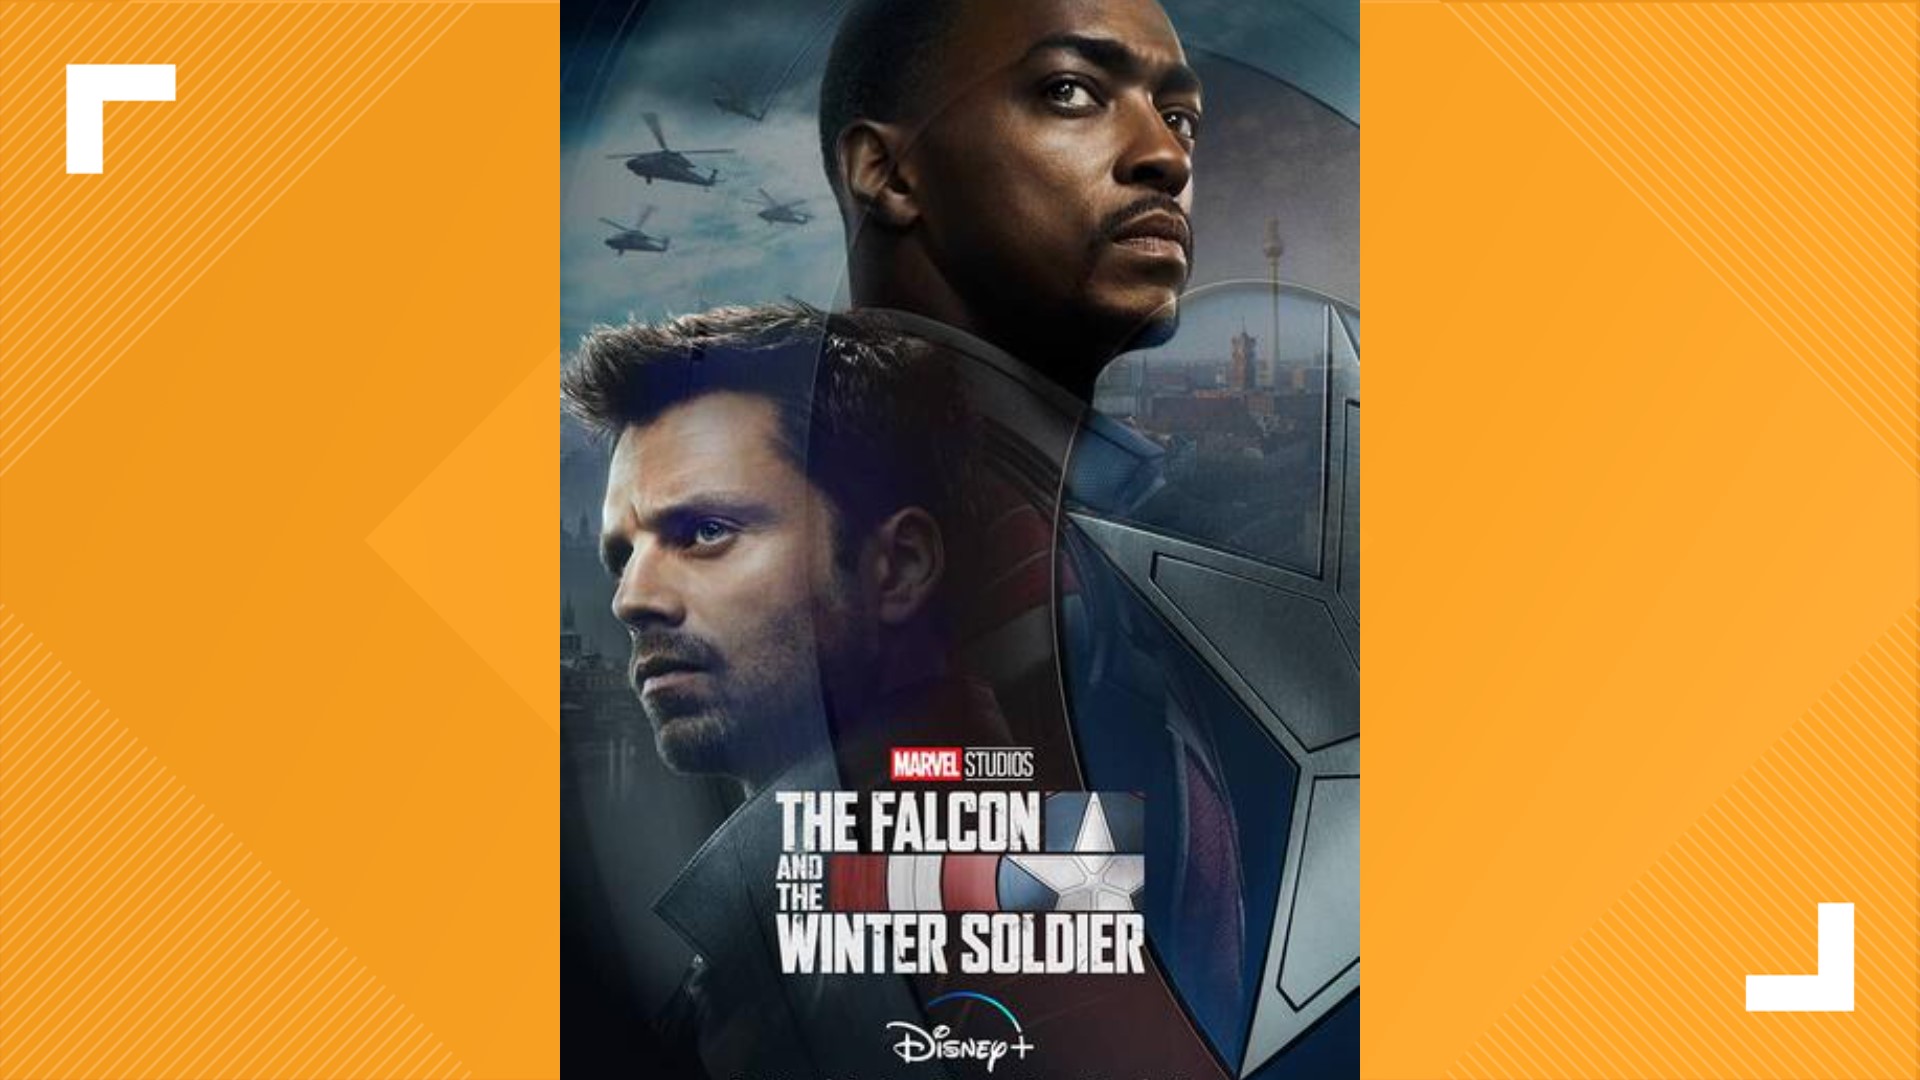 The series picks up following the events of “Avengers: Endgame” with characters  Sam Wilson/Falcon (Anthony Mackie) and Bucky Barnes/Winter Soldier (Sebastian Stan).